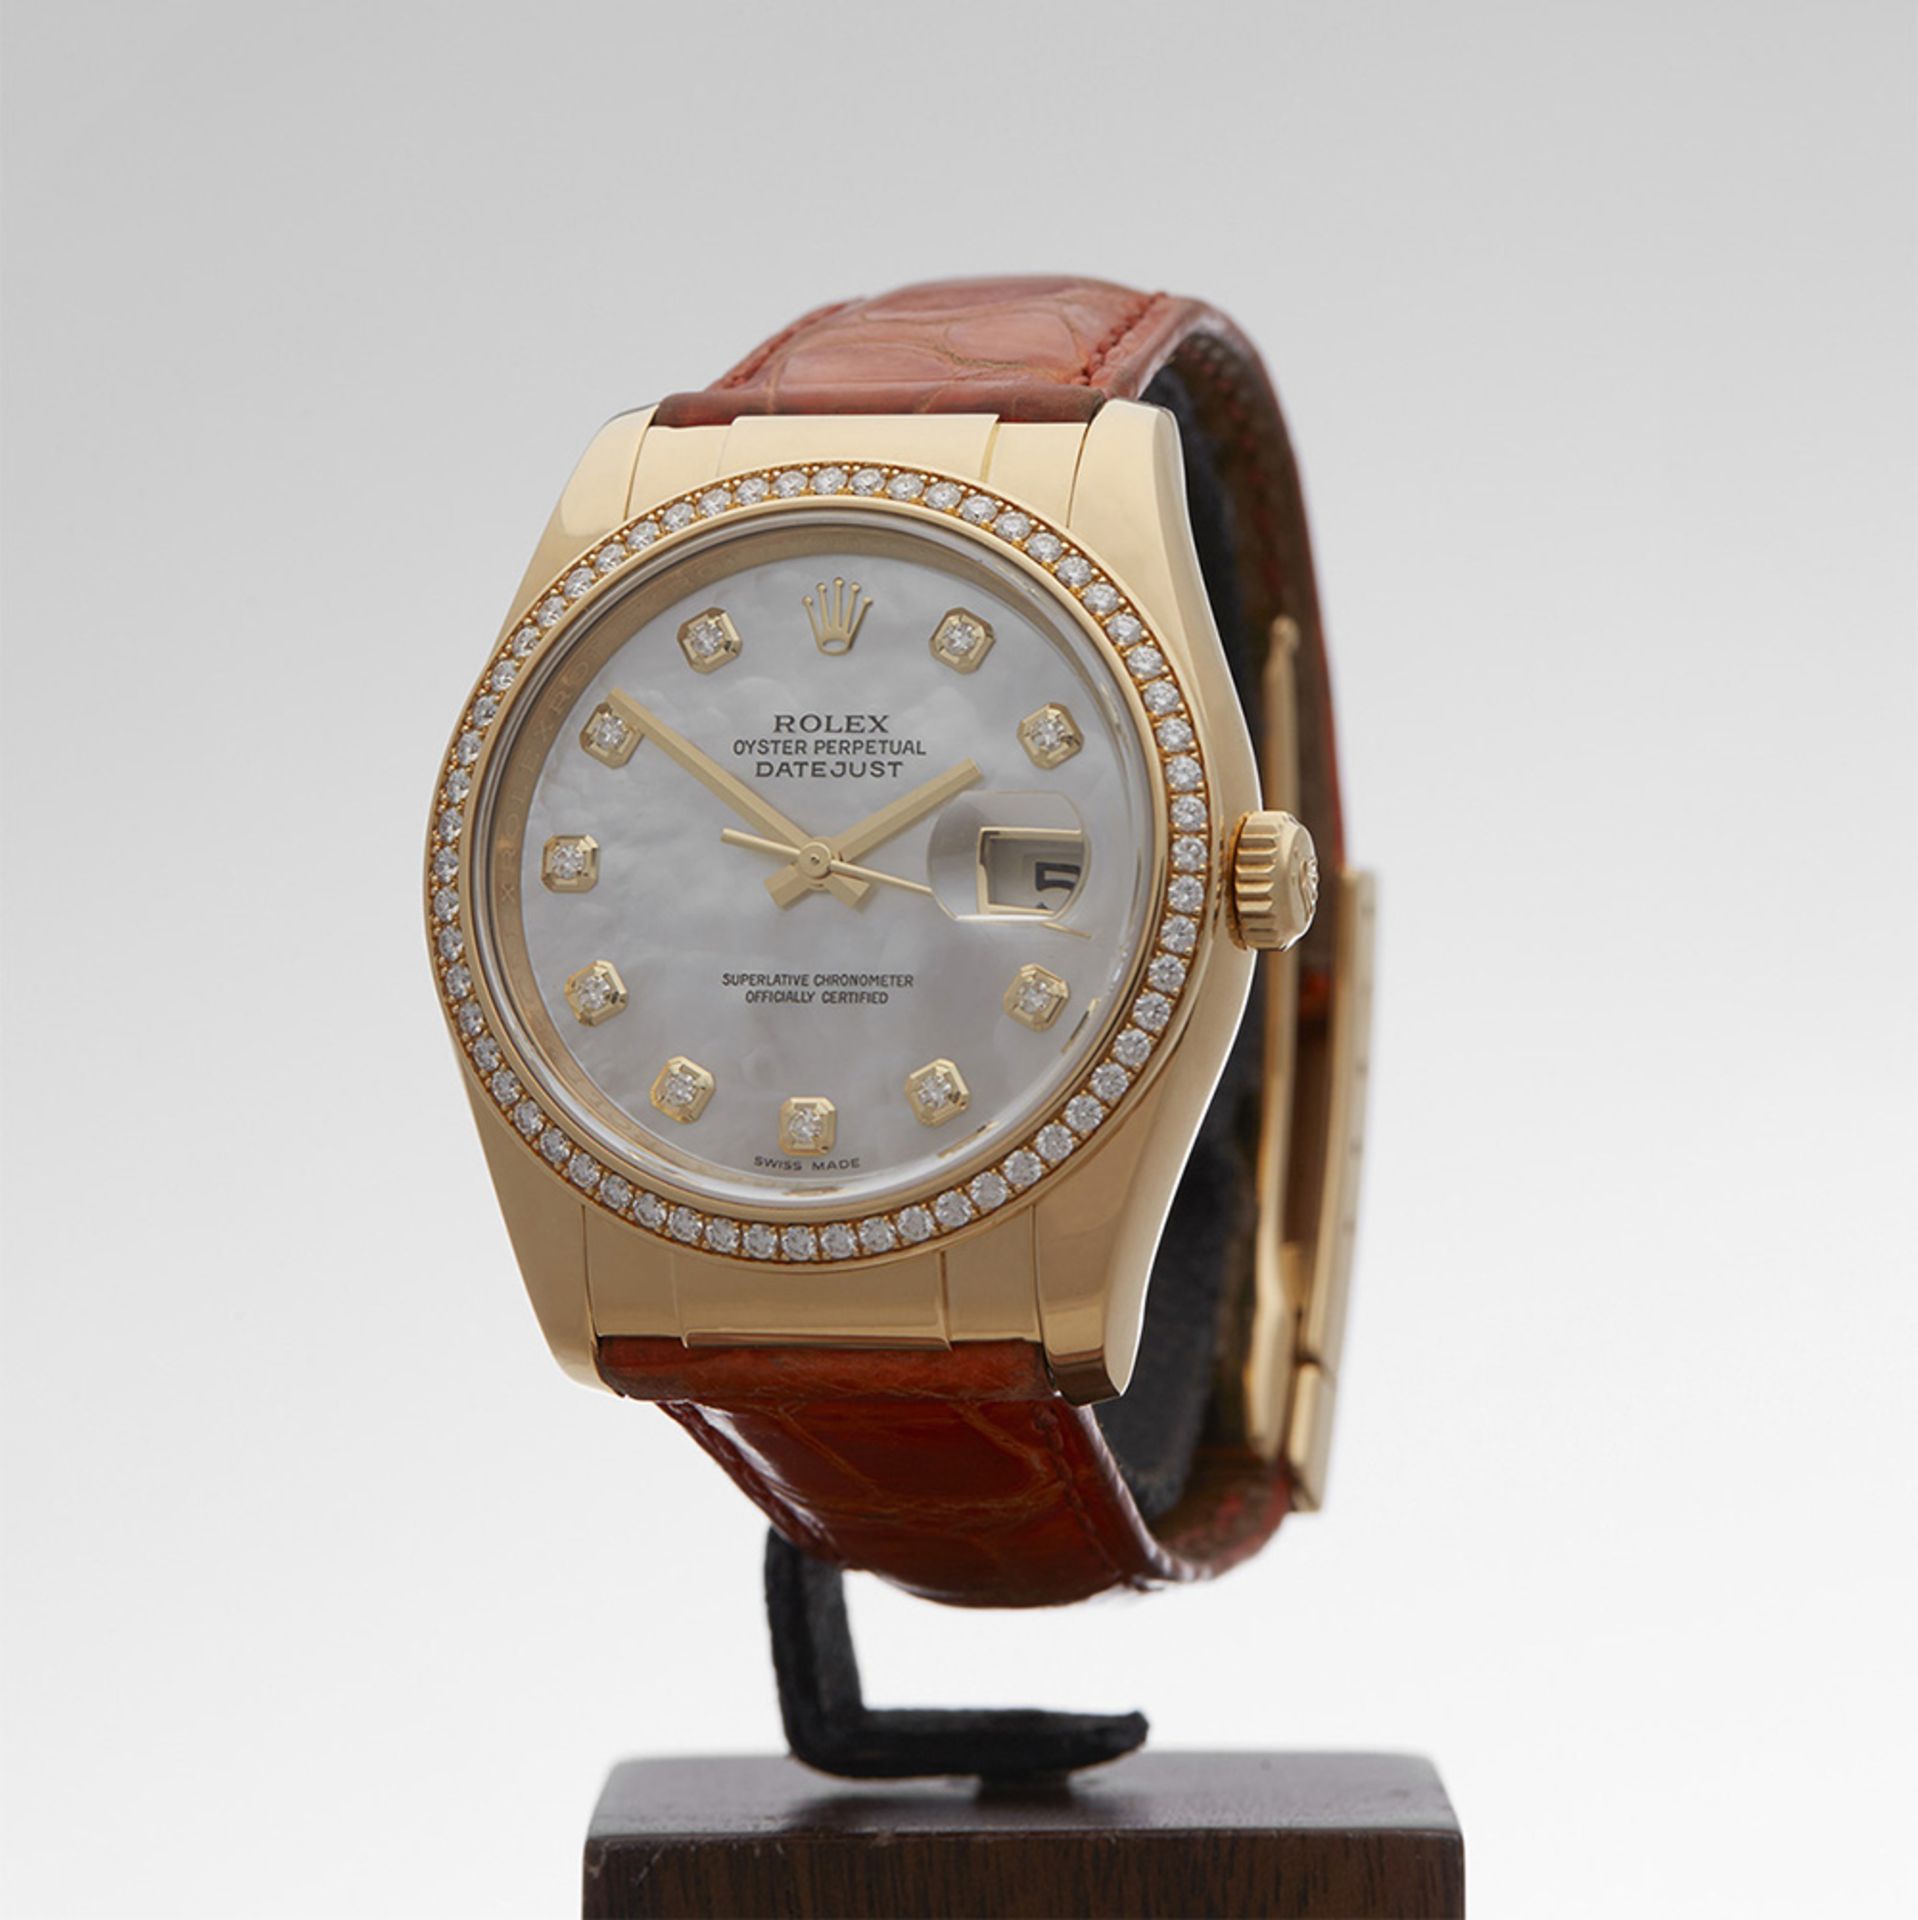 Rolex, Datejust 36mm 18k Yellow Gold 116188 - Image 3 of 9